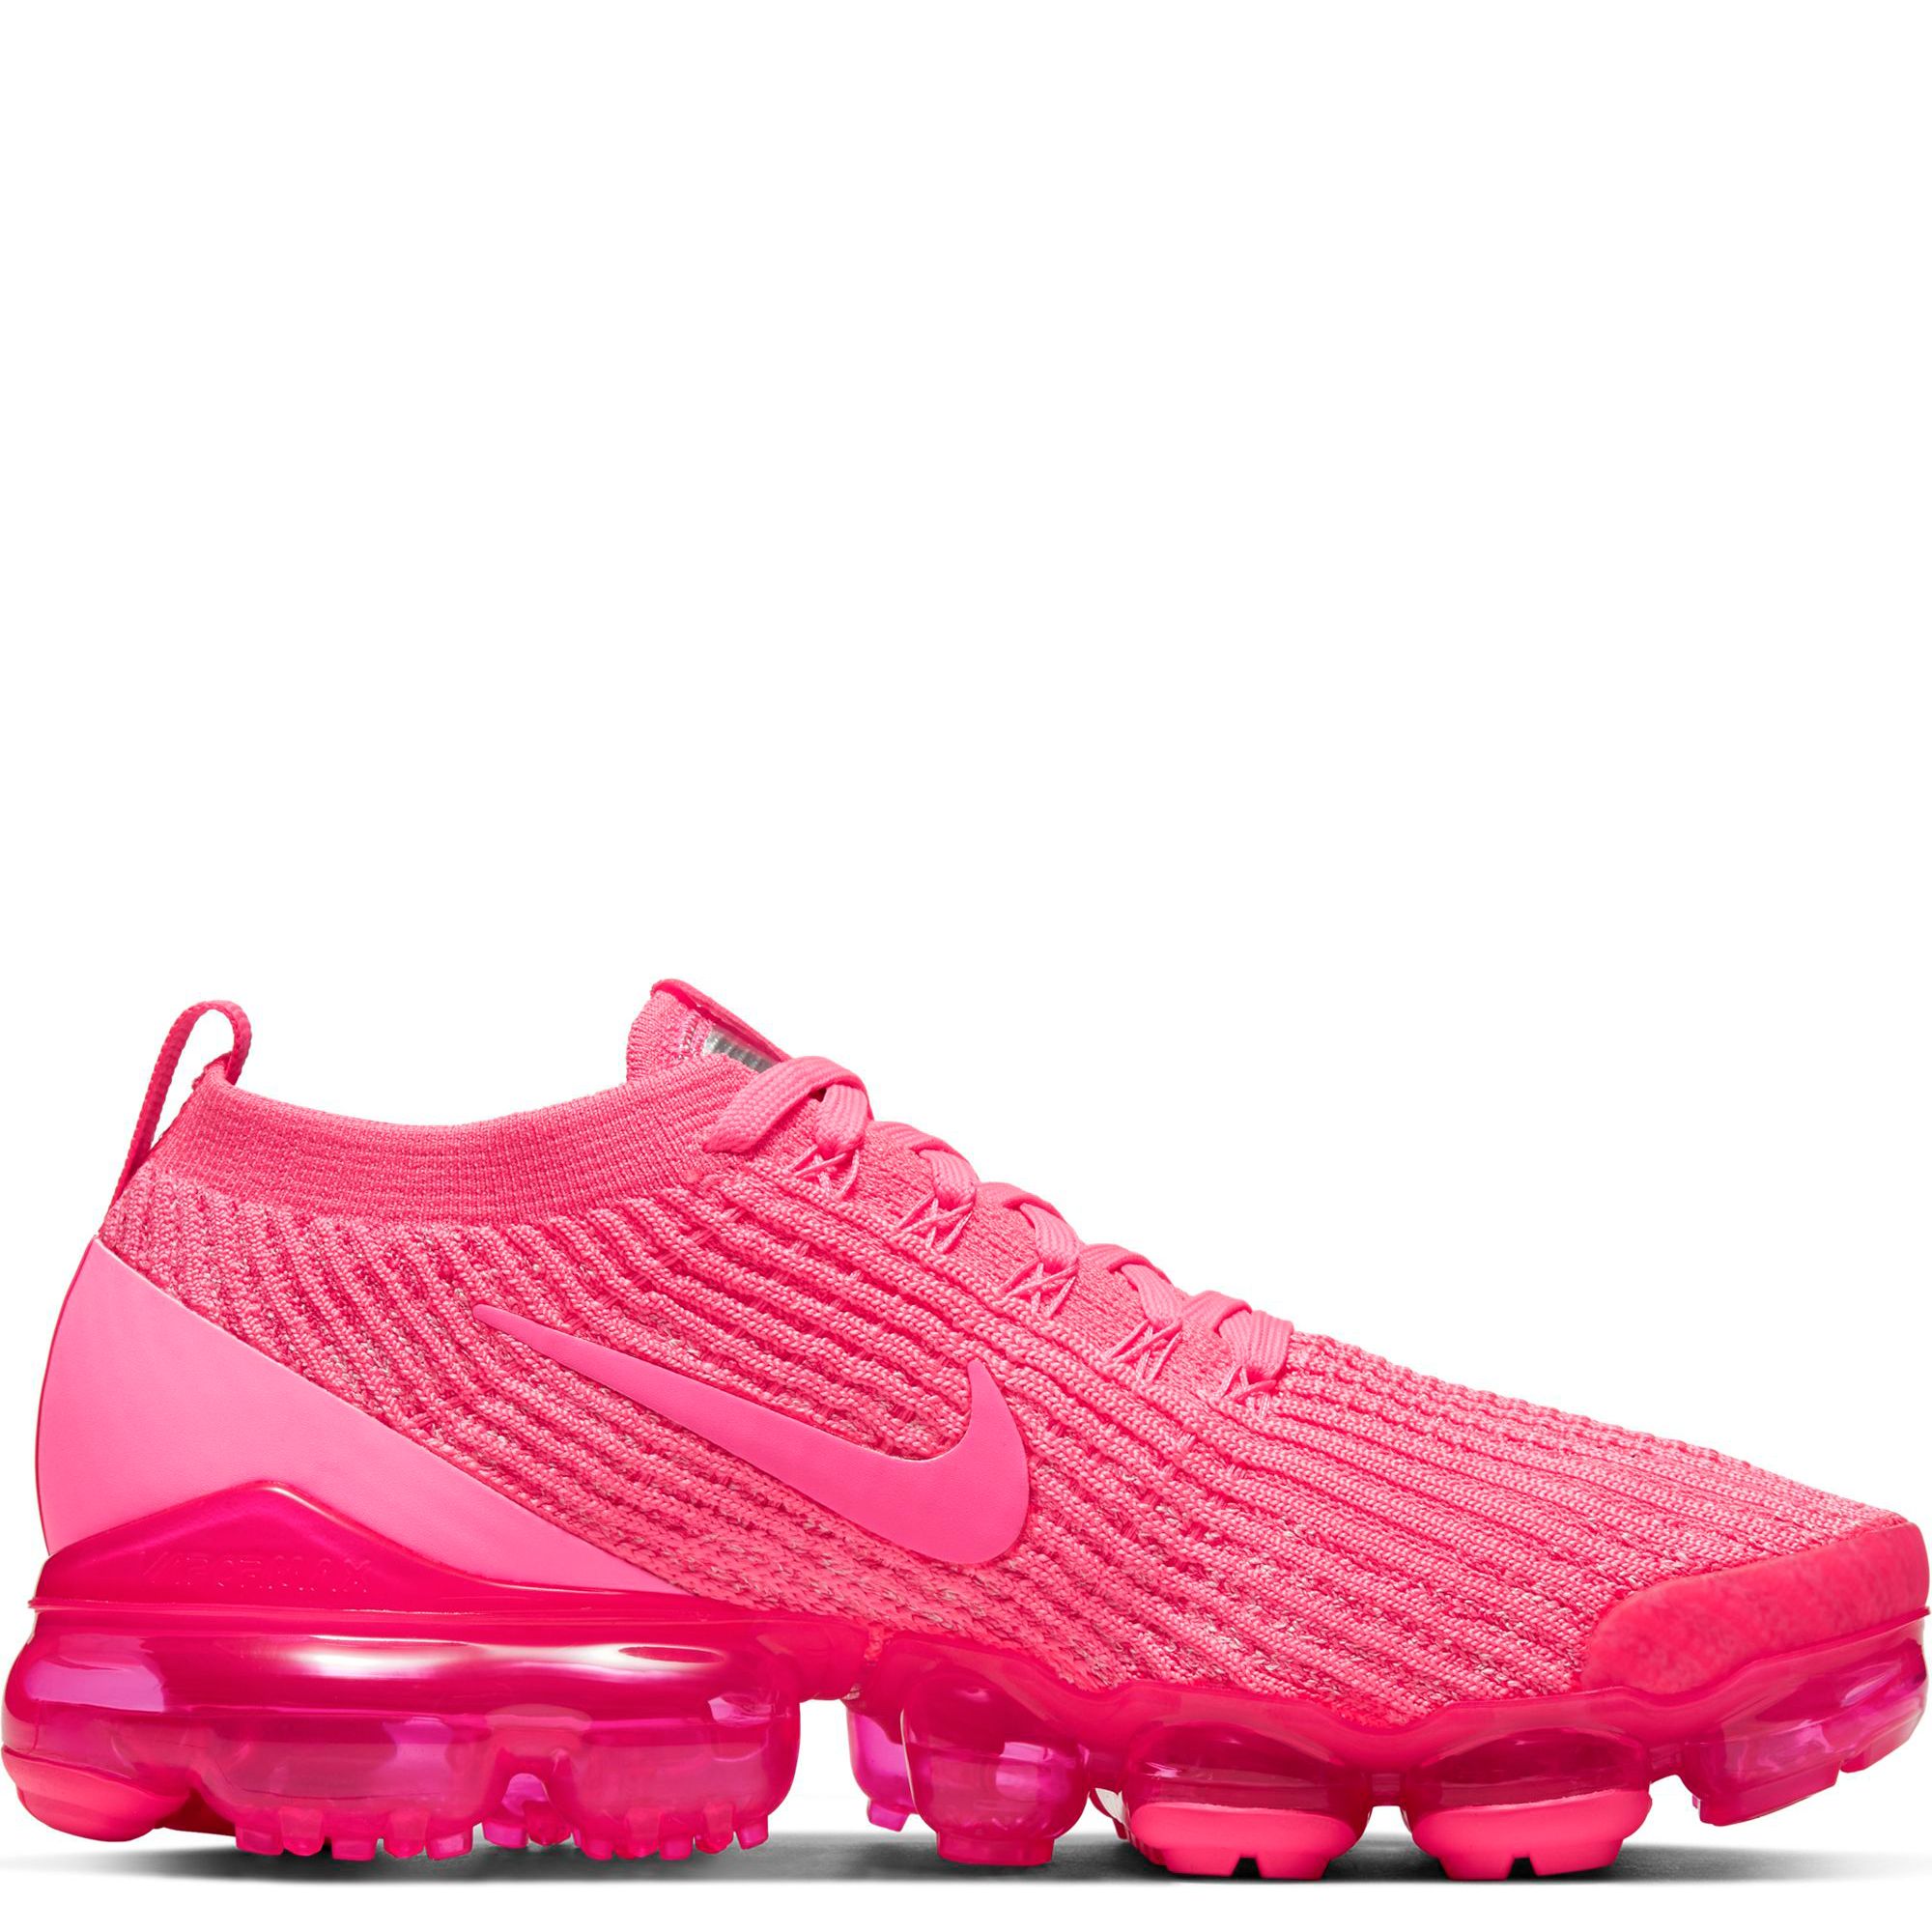 Finish Line - Pretty in pink 💞. Shop Nike Air VaporMax Flyknit 3